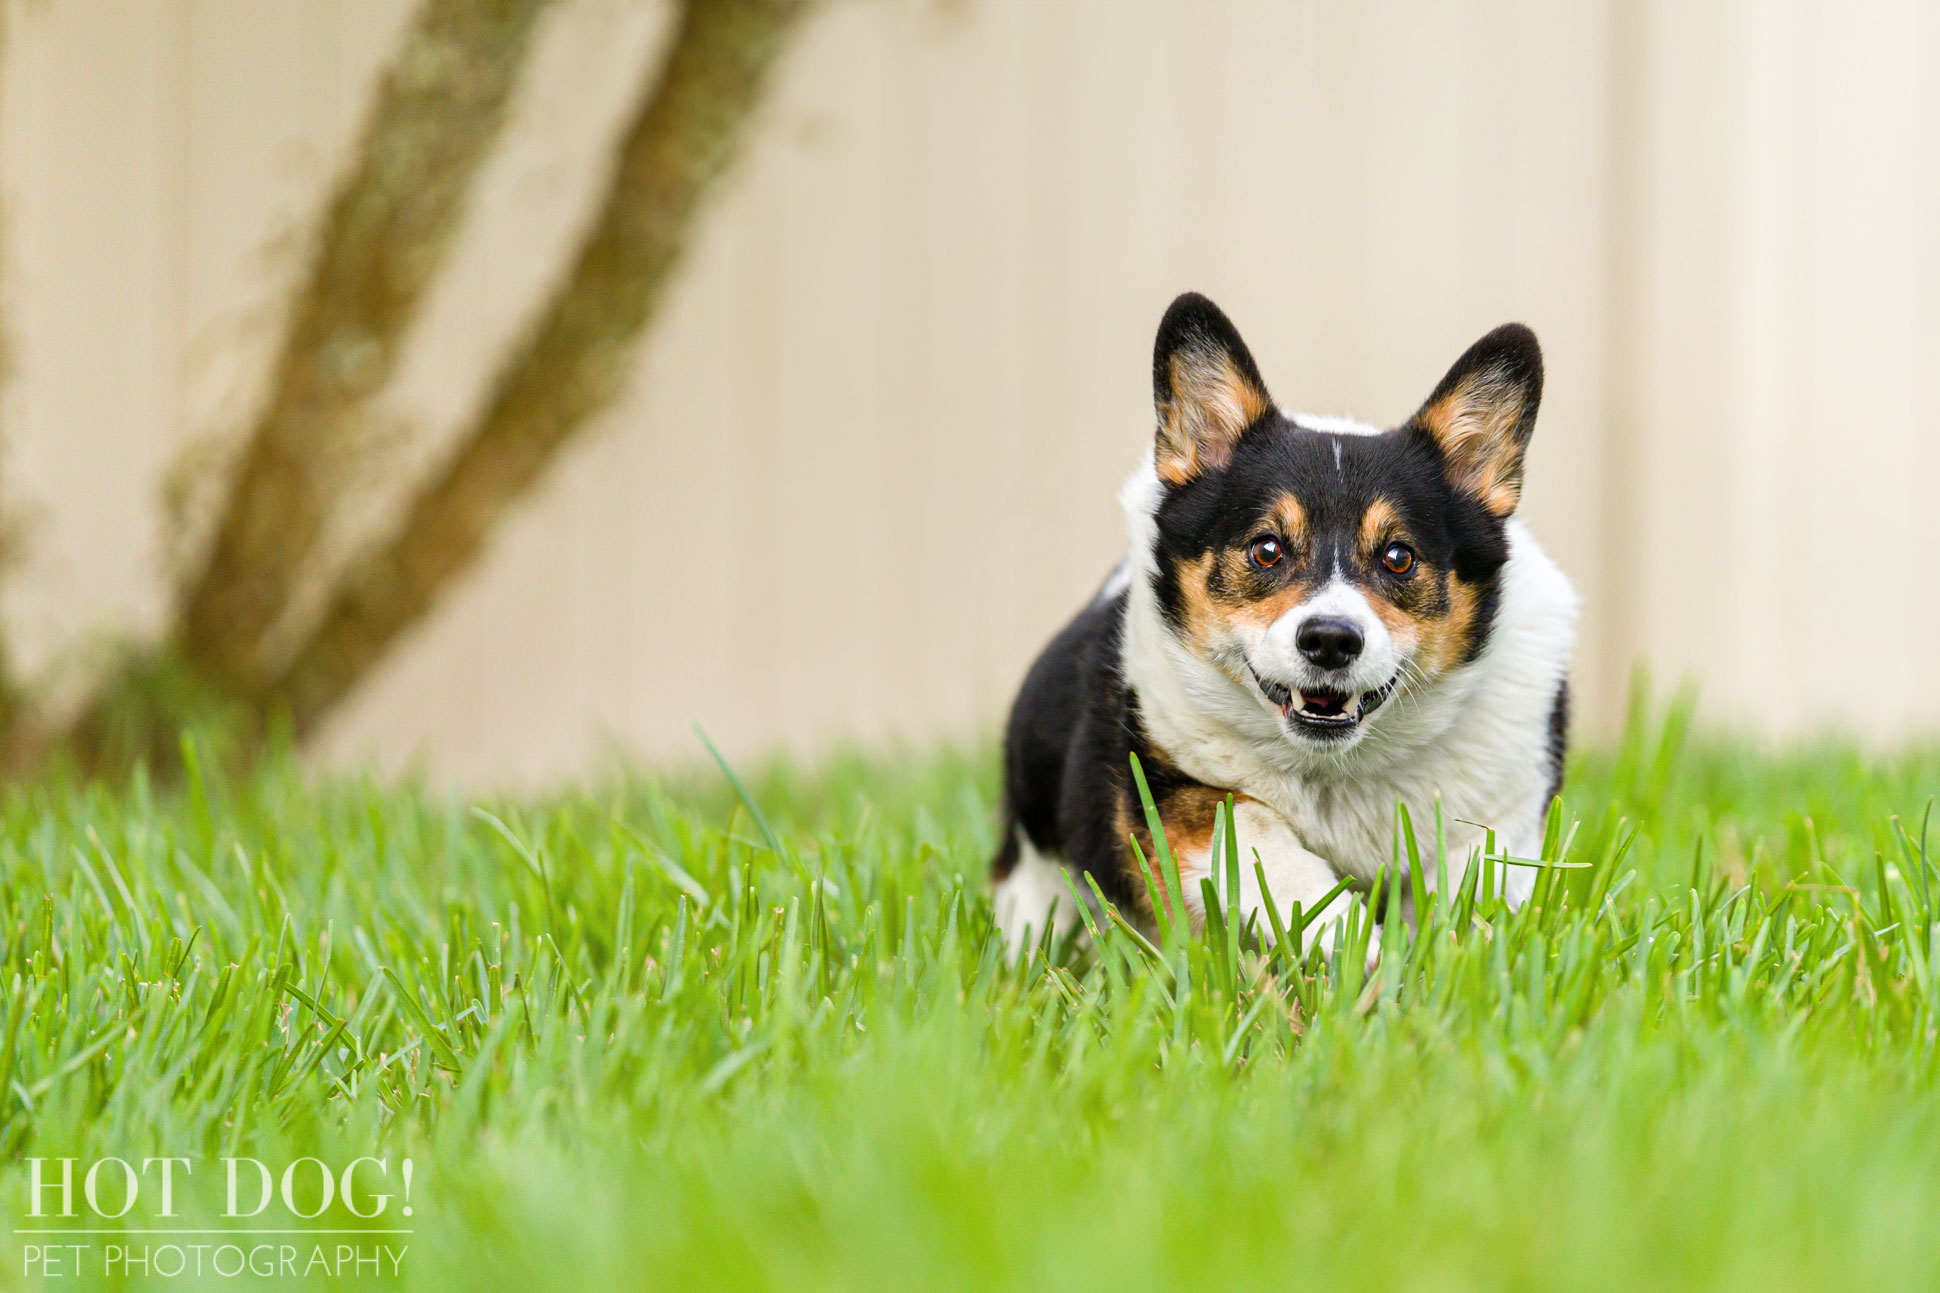 Snap the corgi is the star of this professional pet photo session by Hot Dog! Pet Photography.